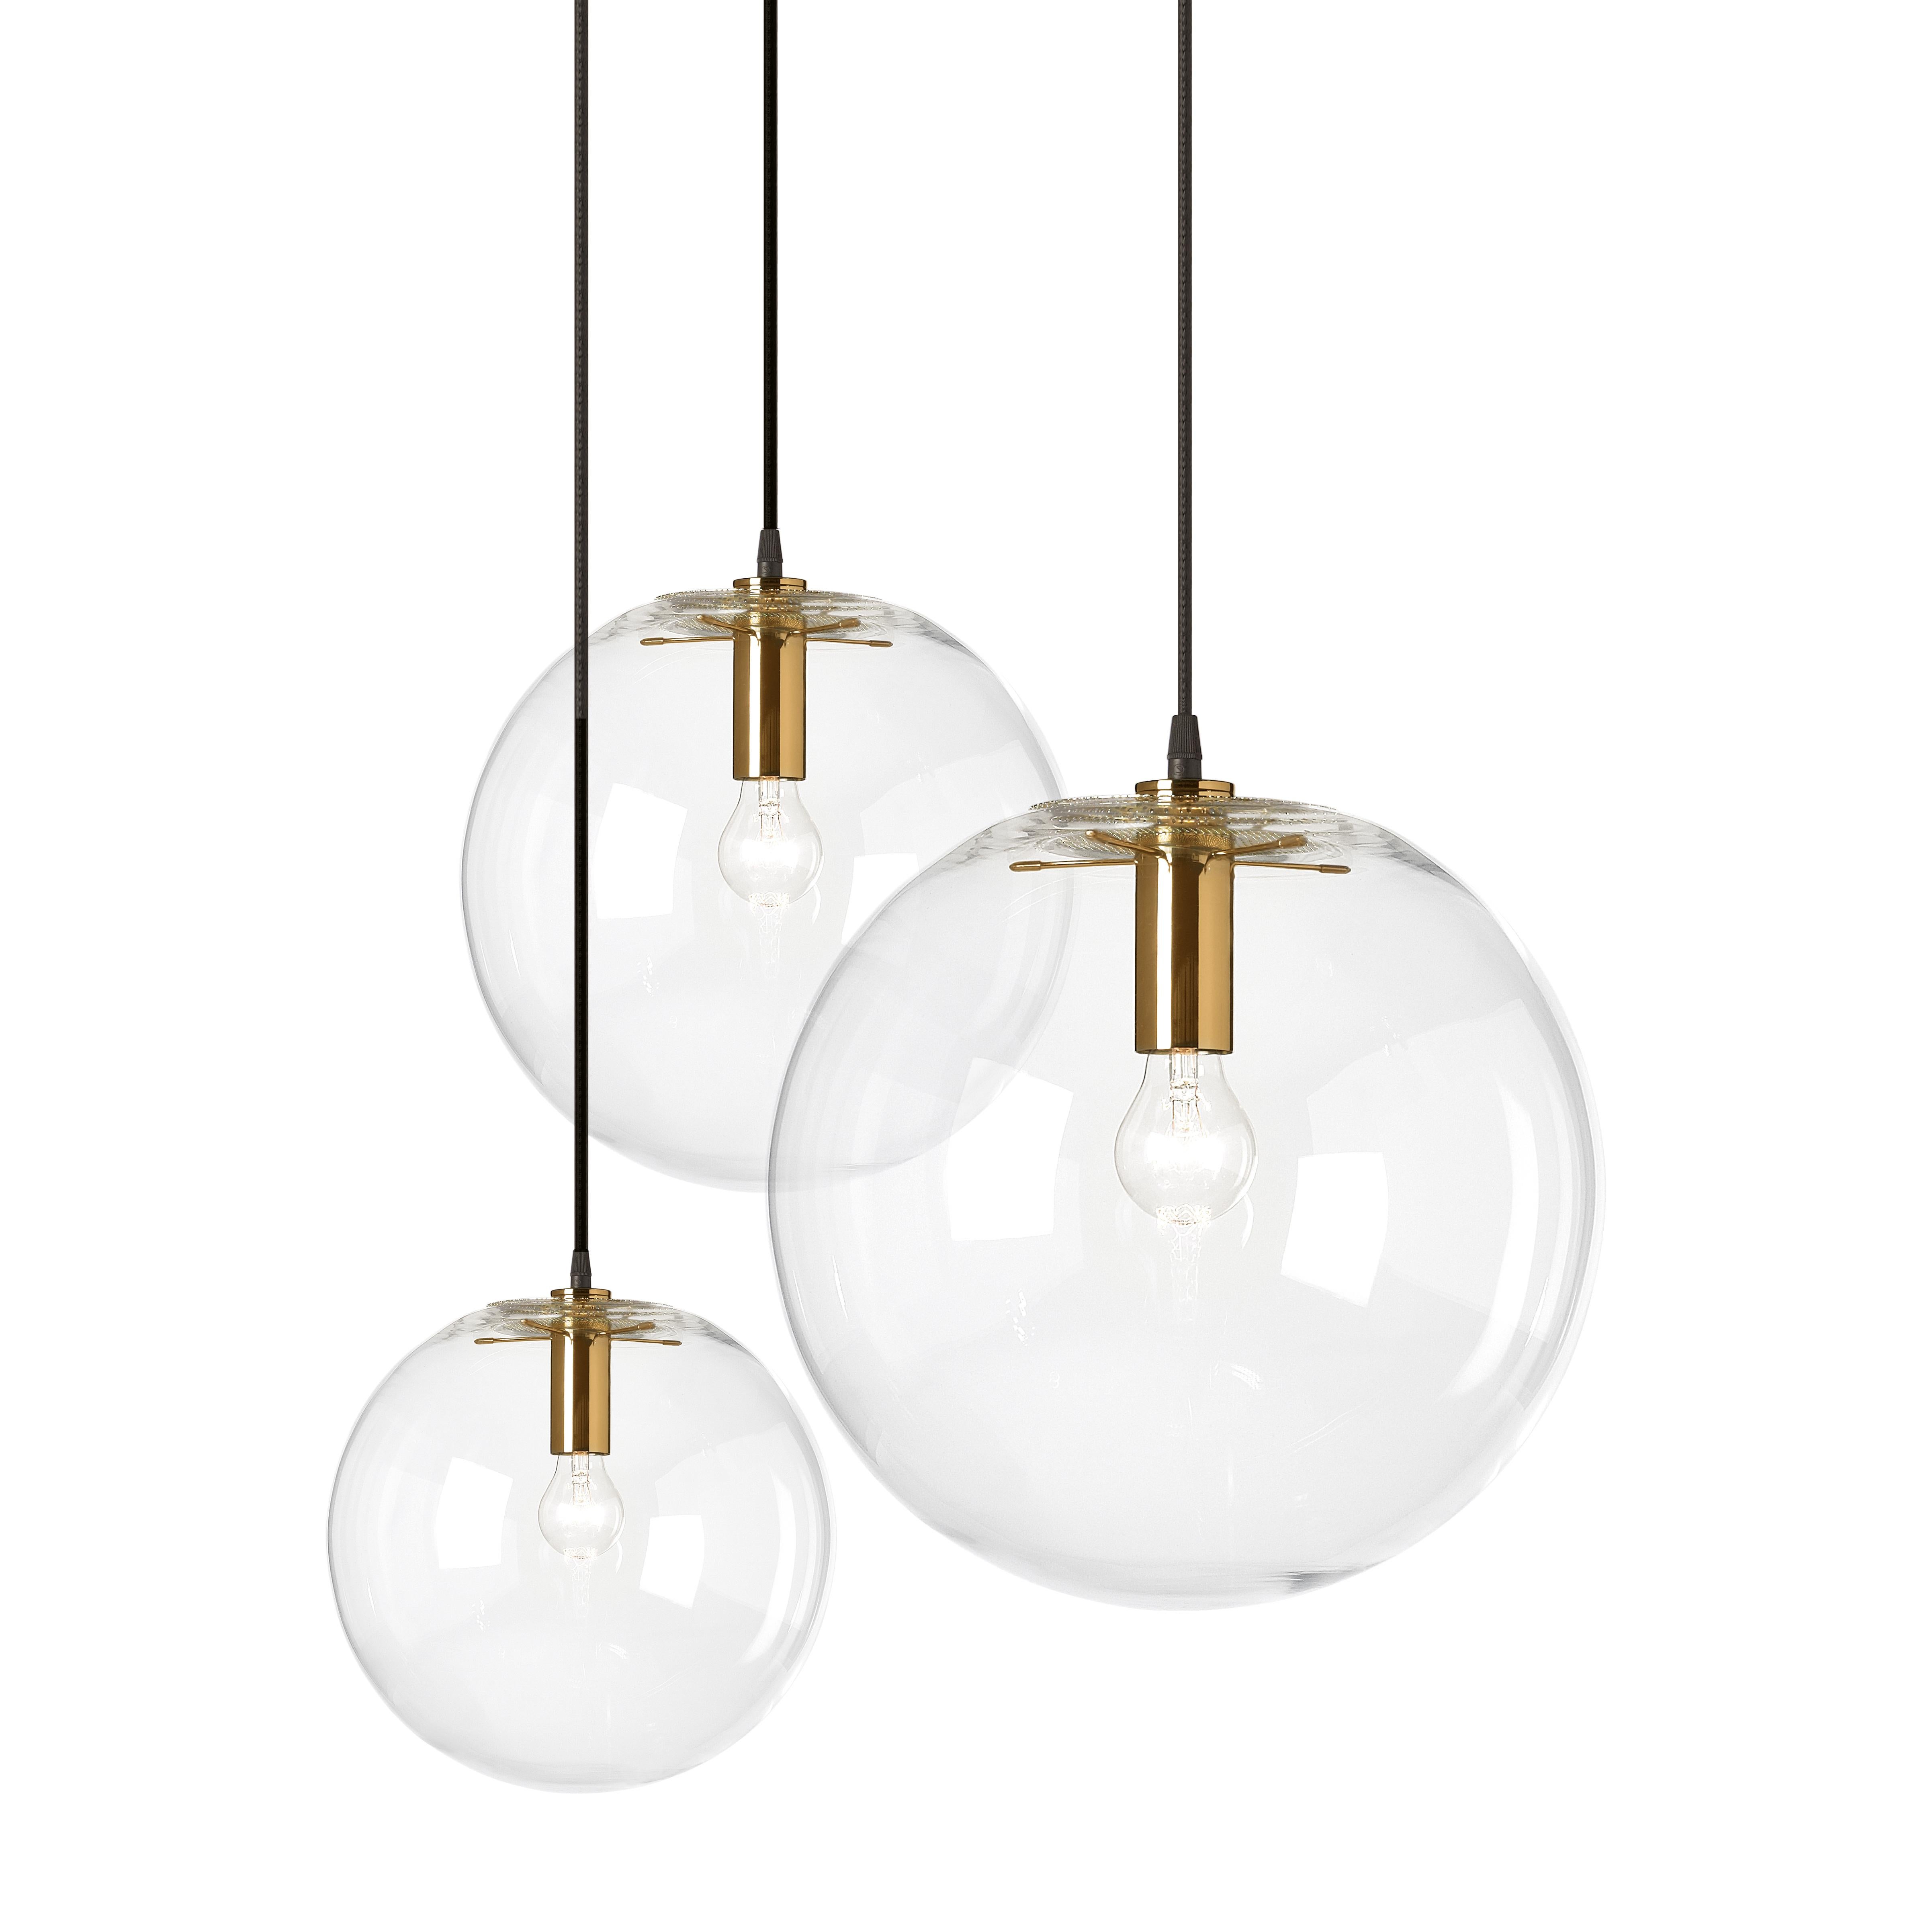 hand blown clear crystal glass sphere. Centrally suspended by a five-armed light head. Insect protection cover and light head in metal, brass-plated. Black fabric covered wire.

UL version 110 V:
Max. 60 W / 110 V
Socket E 26

Dimensions: W 30